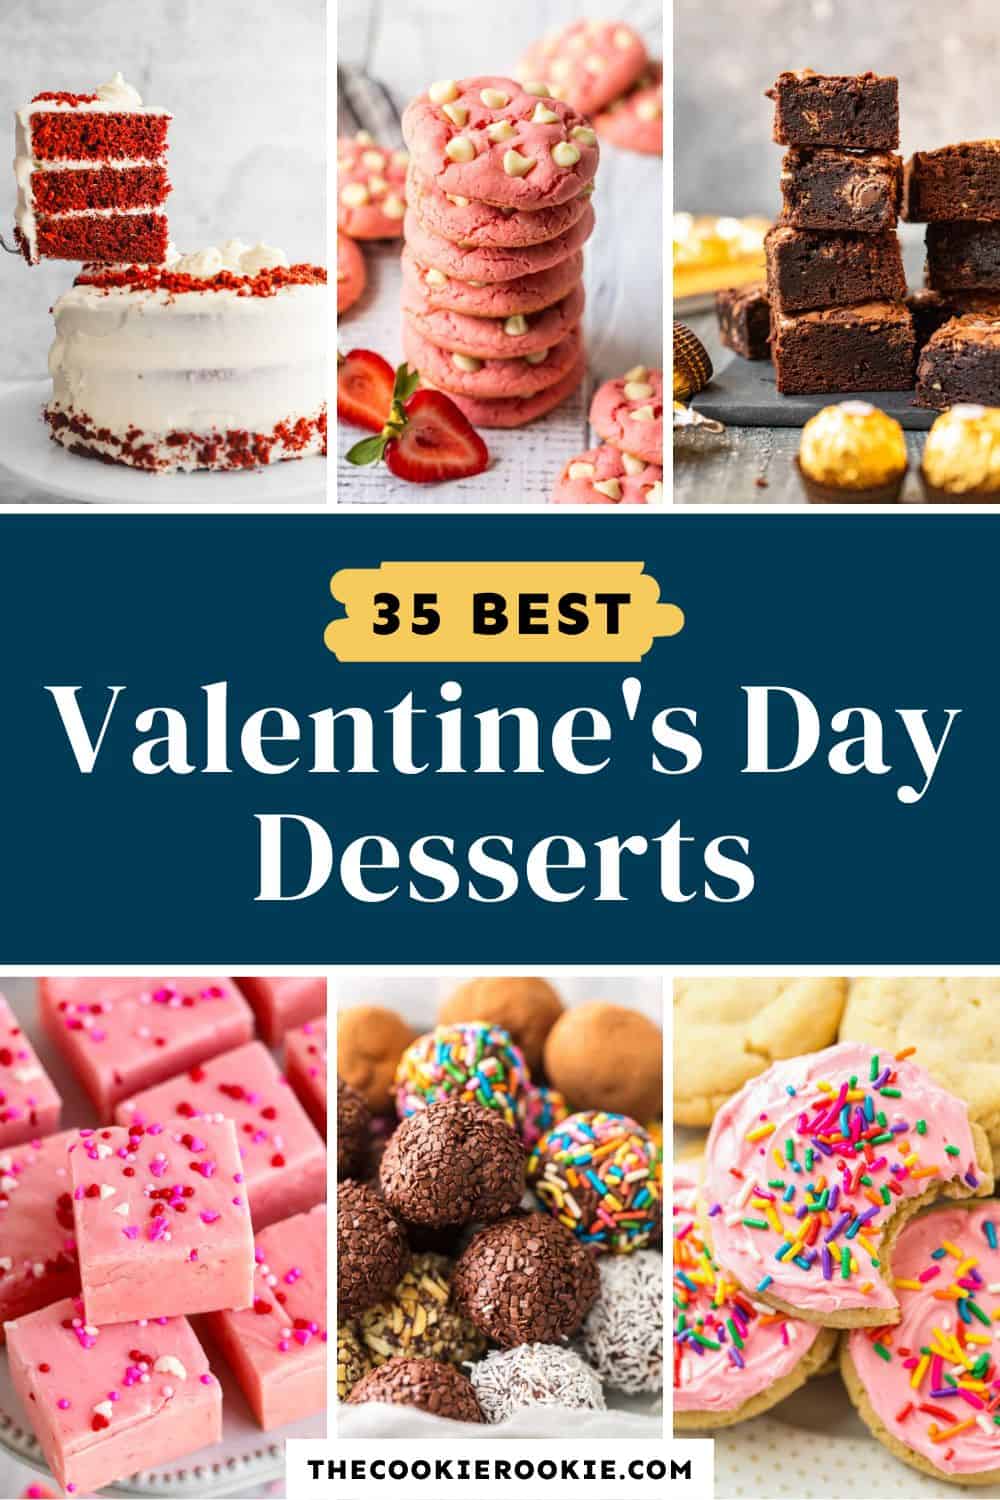 35 Easy Chocolate Desserts - The Cookie Rookie®